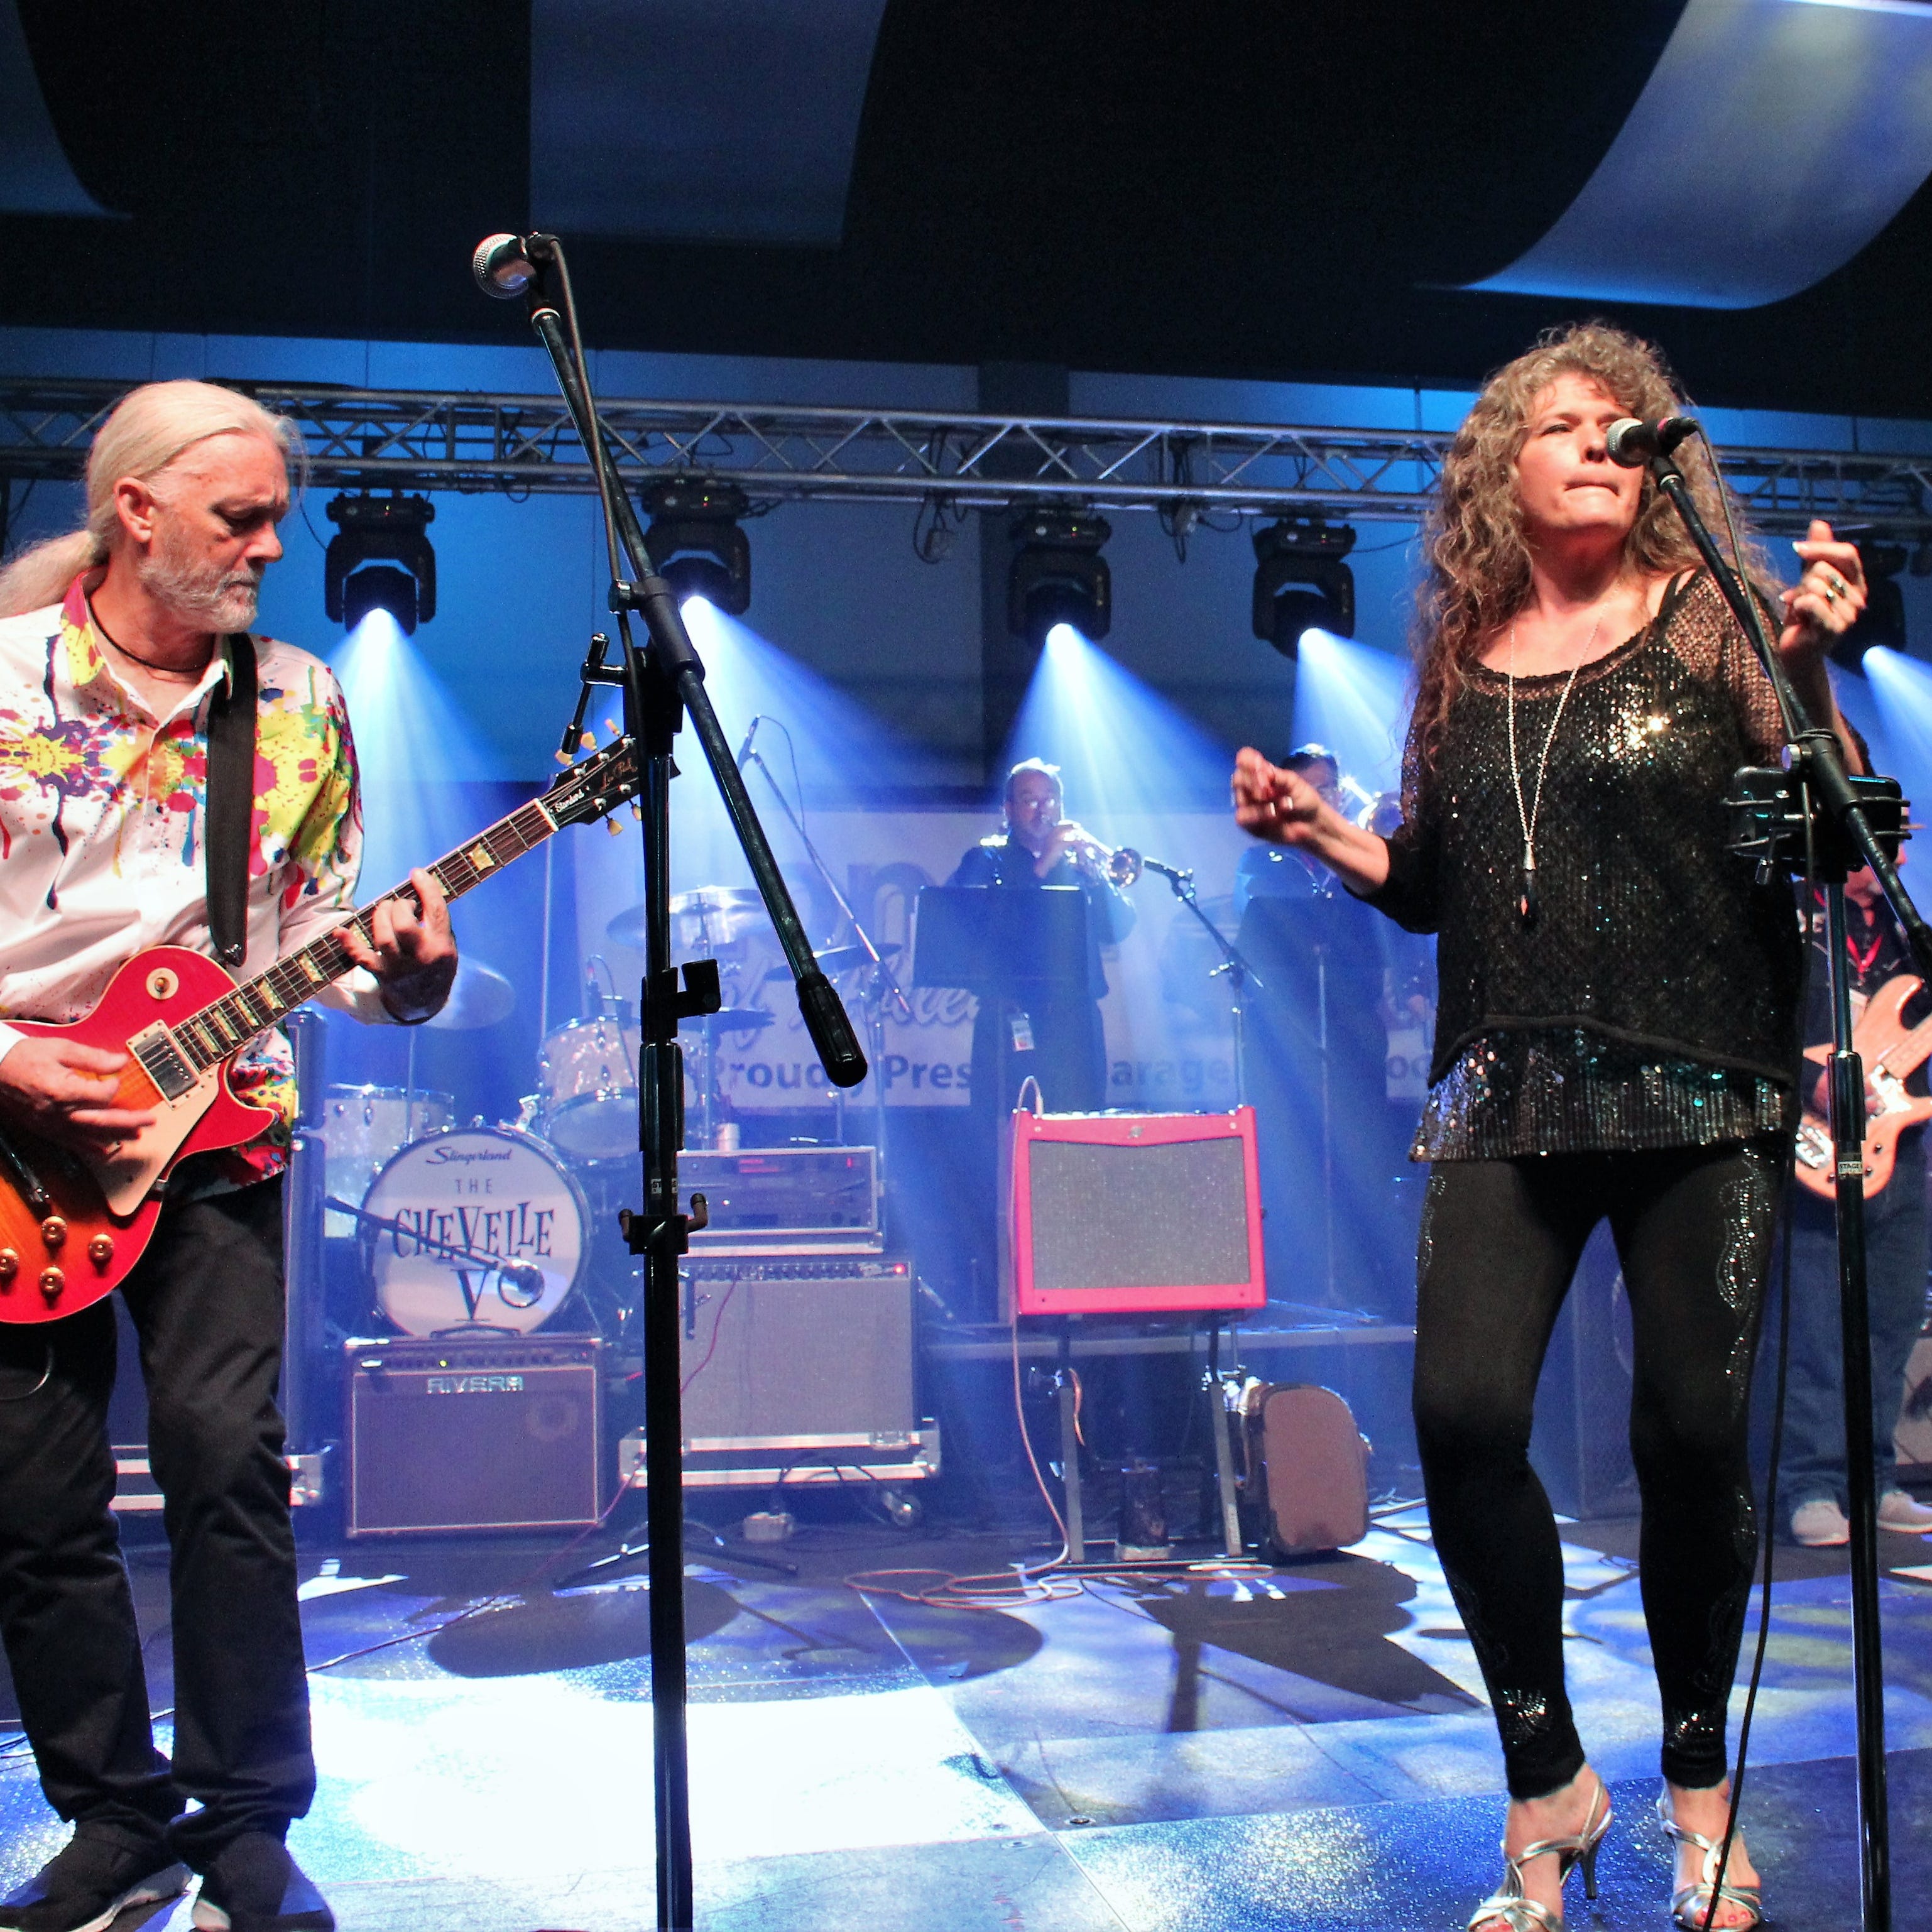 Husband and wife Doug and Shannon Roysden, left, joined several bands on stage before Doug's band, DRB, had a late-night reunion at Garageband Woodstock on Saturday evening at the Abilene Convention Center. July 27 2019